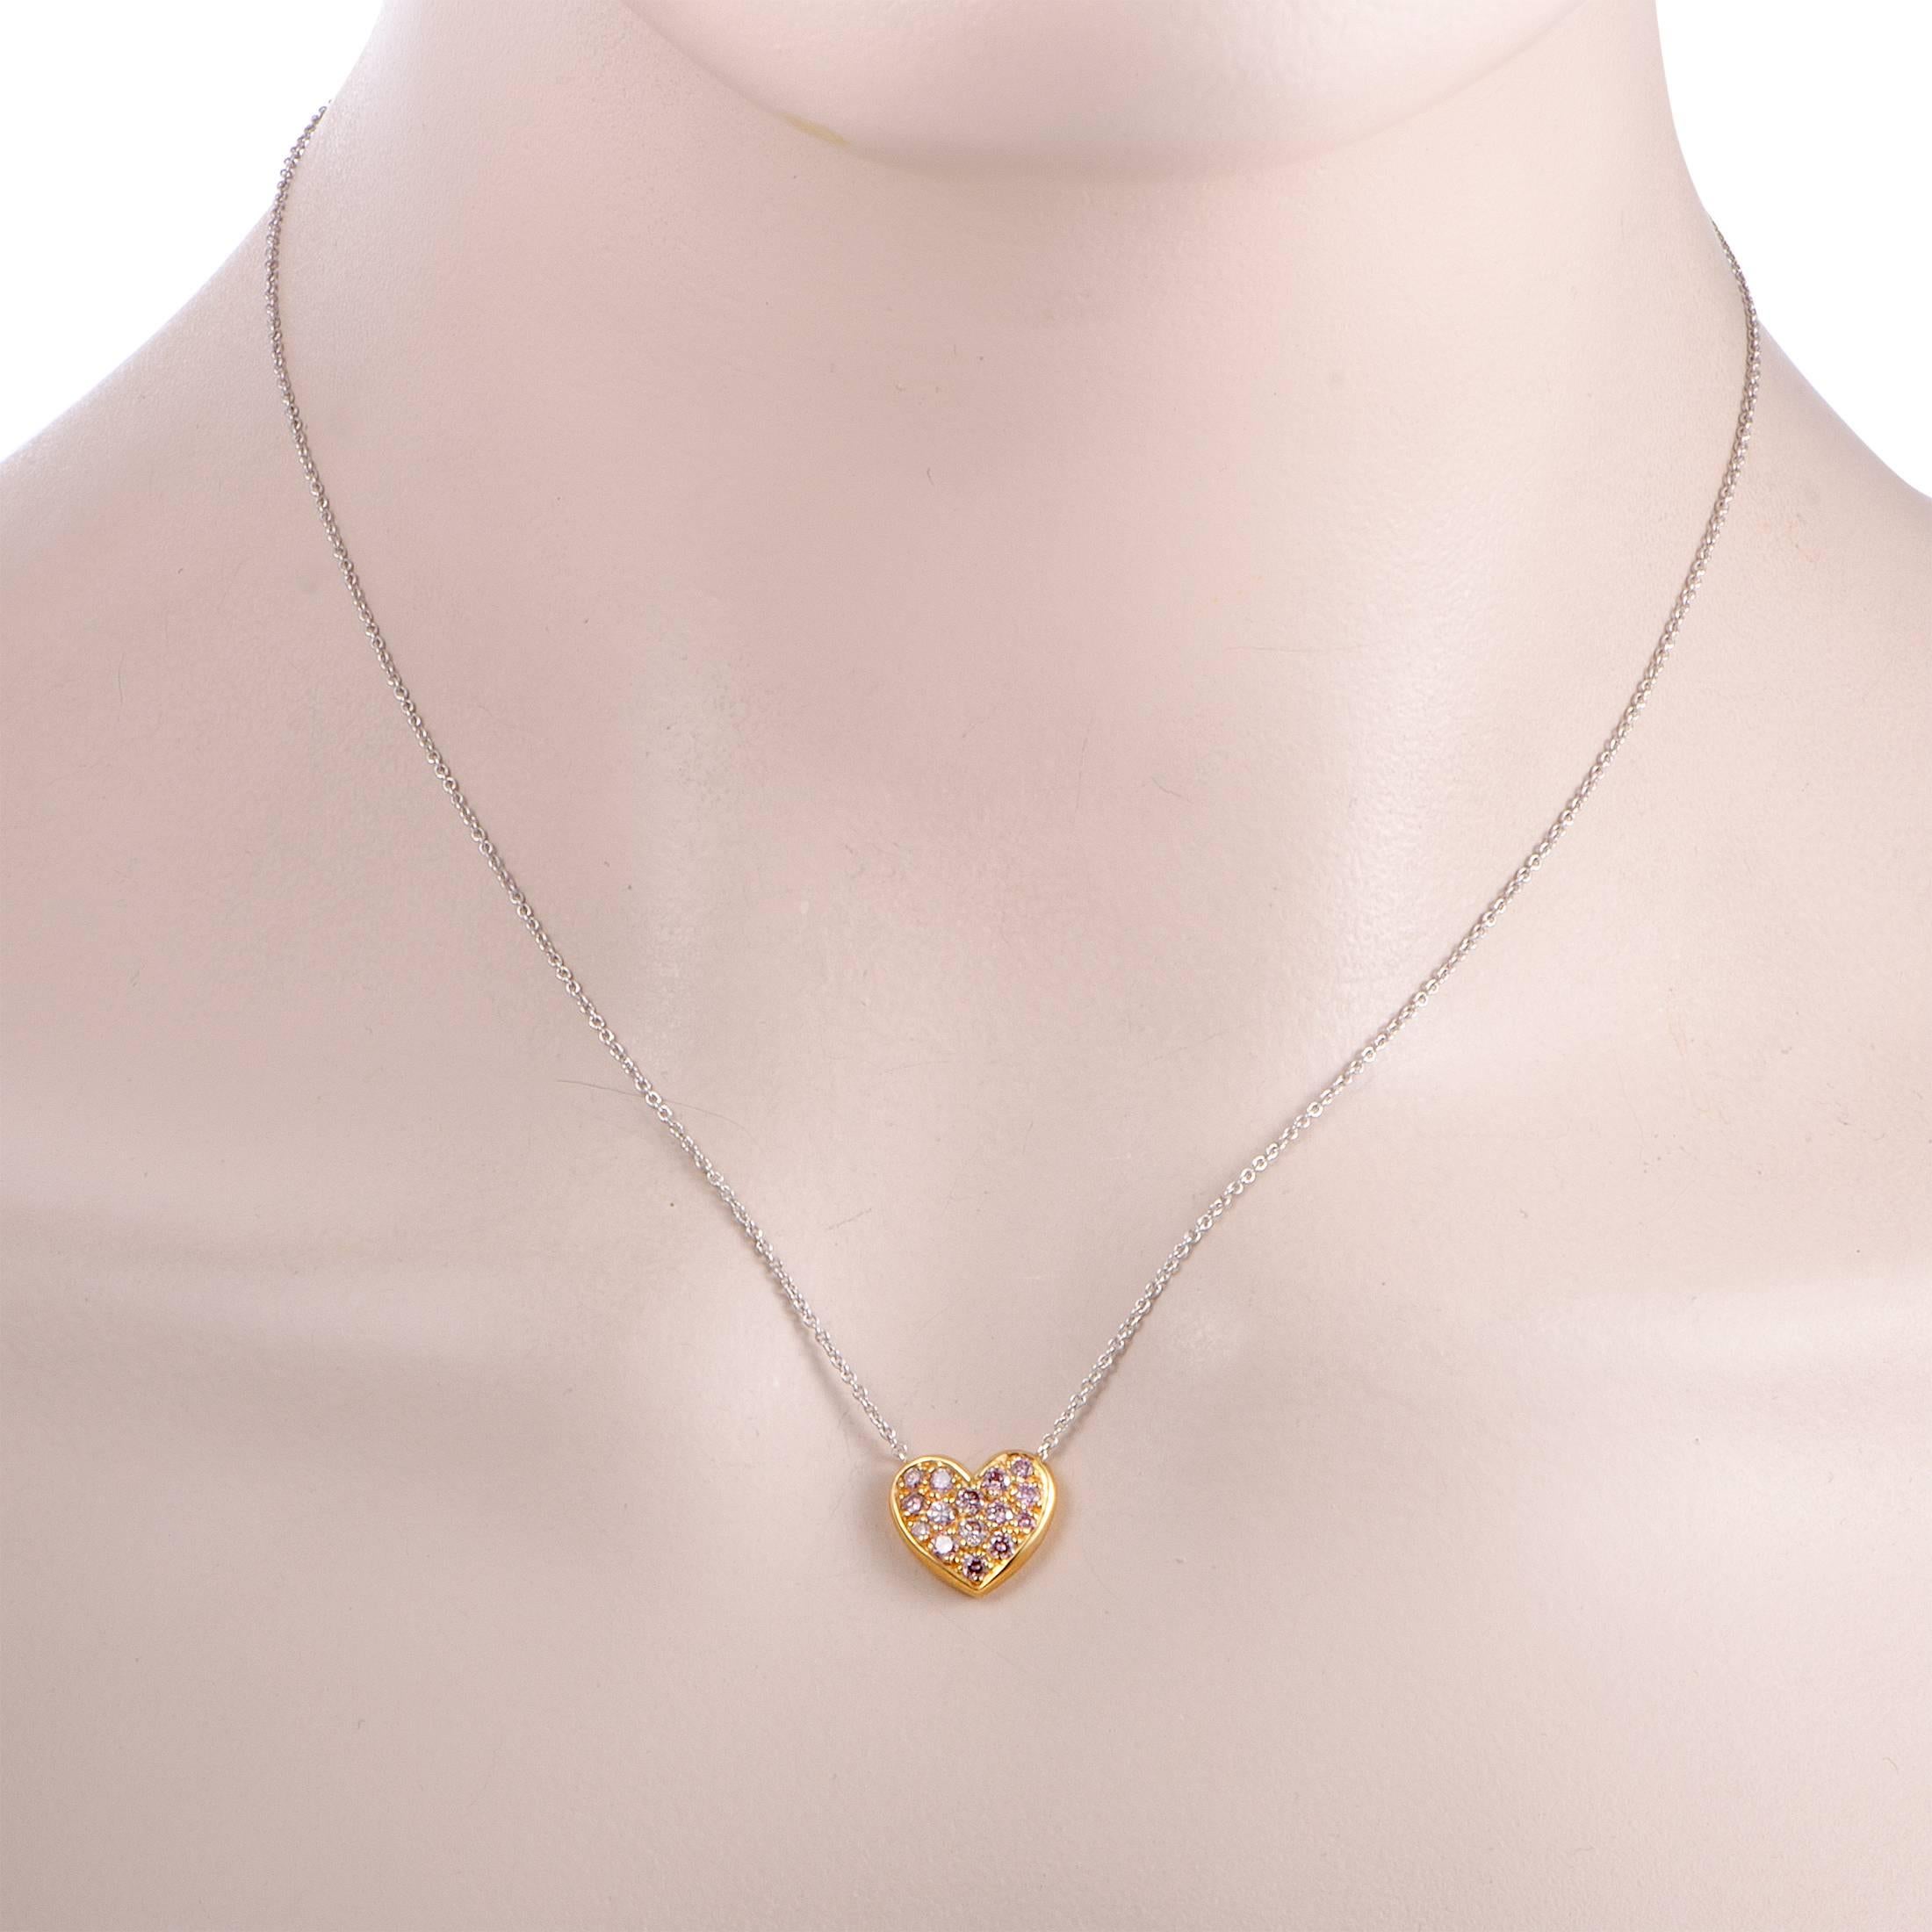 This gorgeous necklace is a Graff design that is presented with an 18K white gold chain onto which a dainty heart pendant is attached. The pendant is crafted from 18K yellow gold and beautifully set with lovely pink diamond stones that amount to